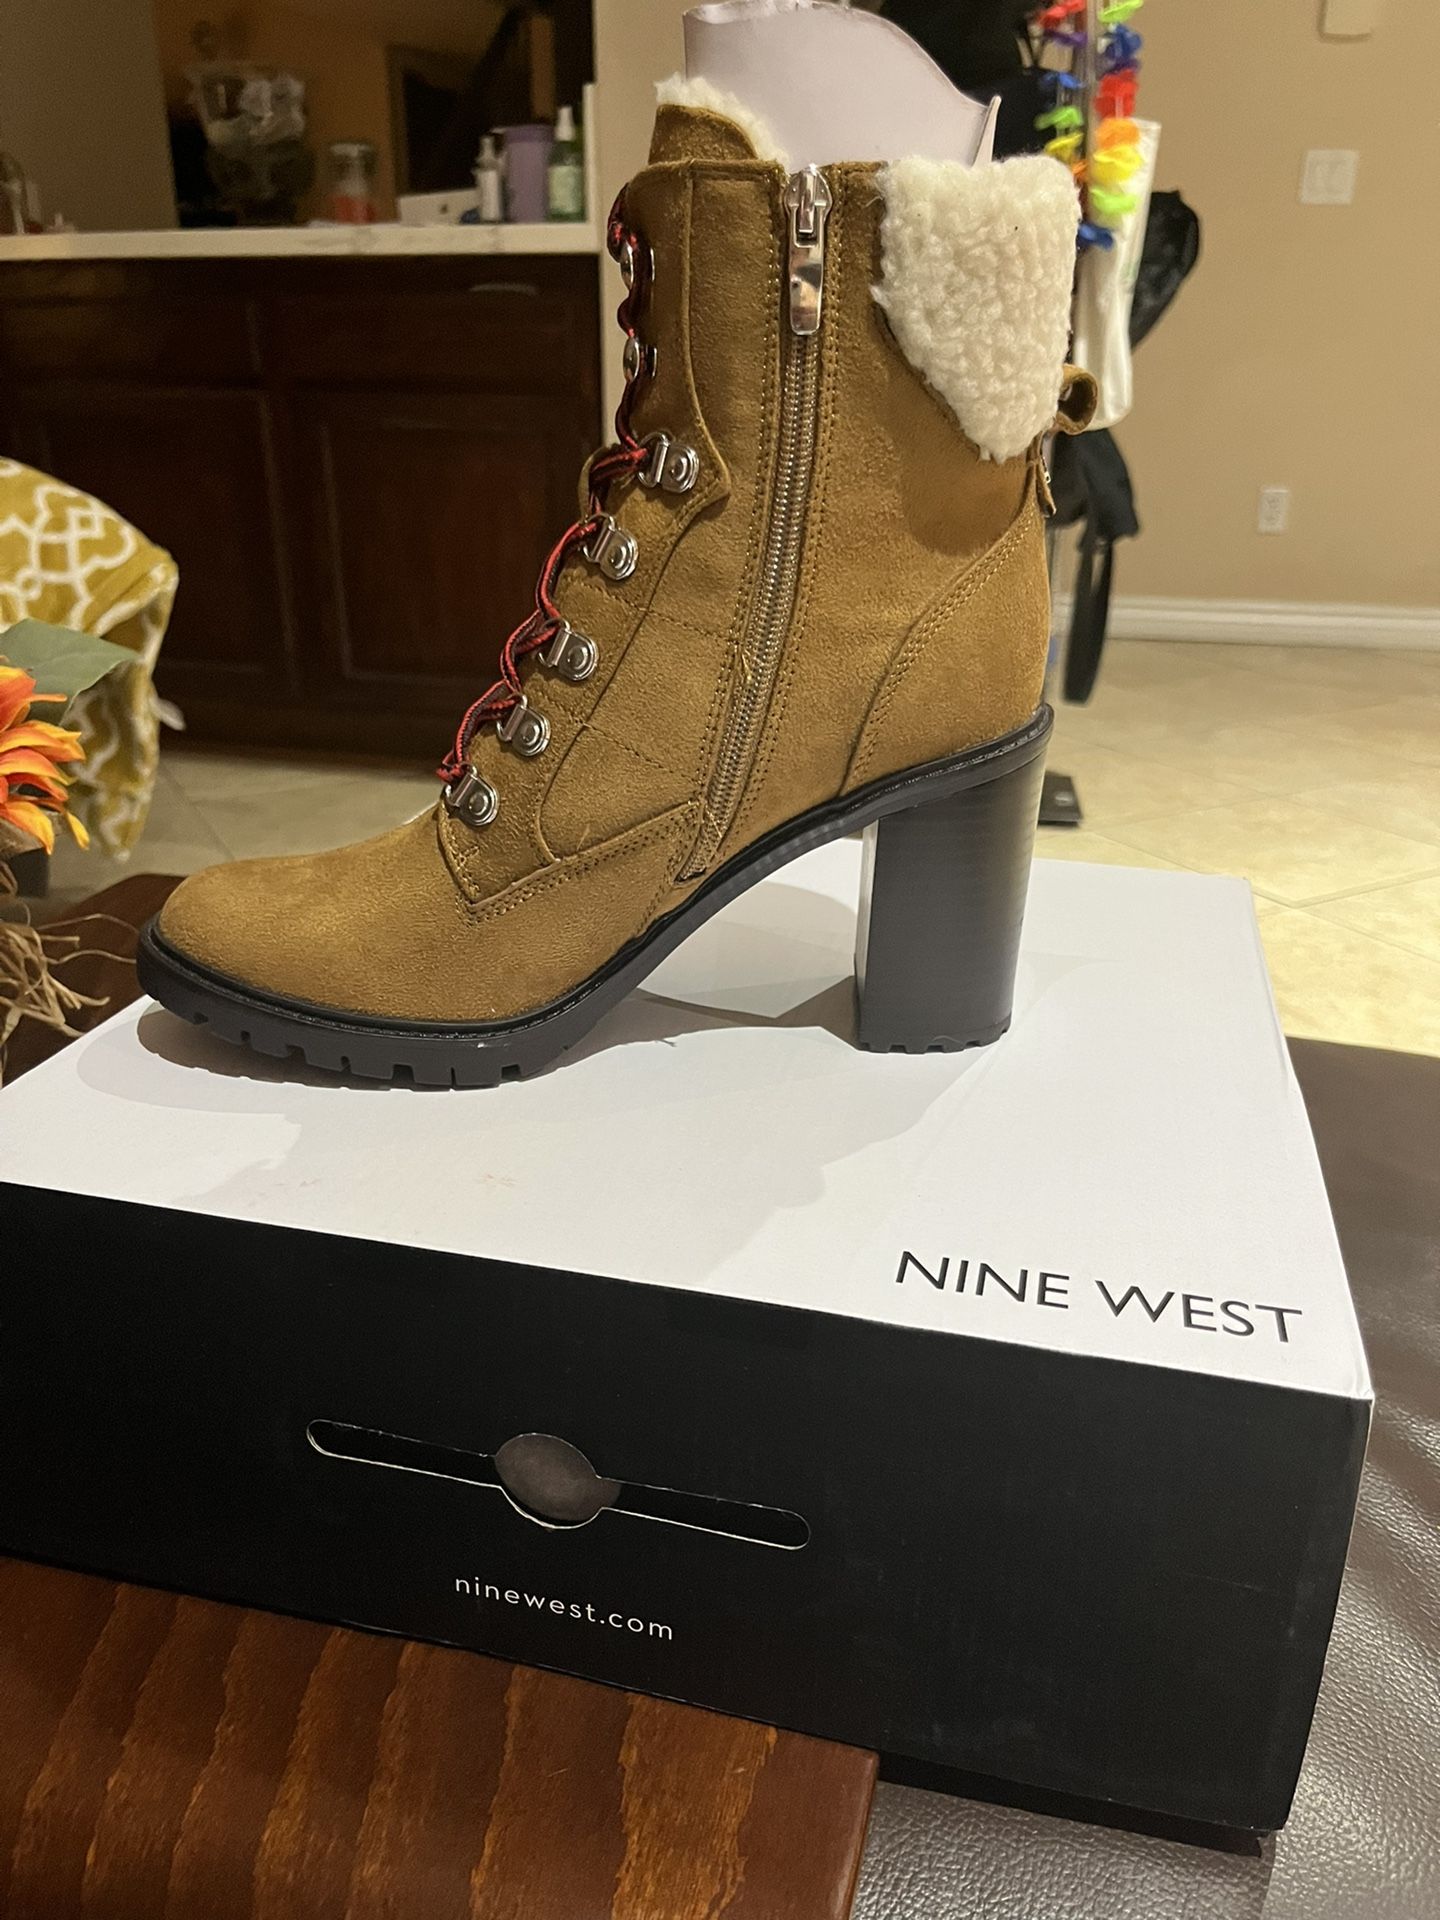 New Nine West Sherpa Boots   8.5 M 